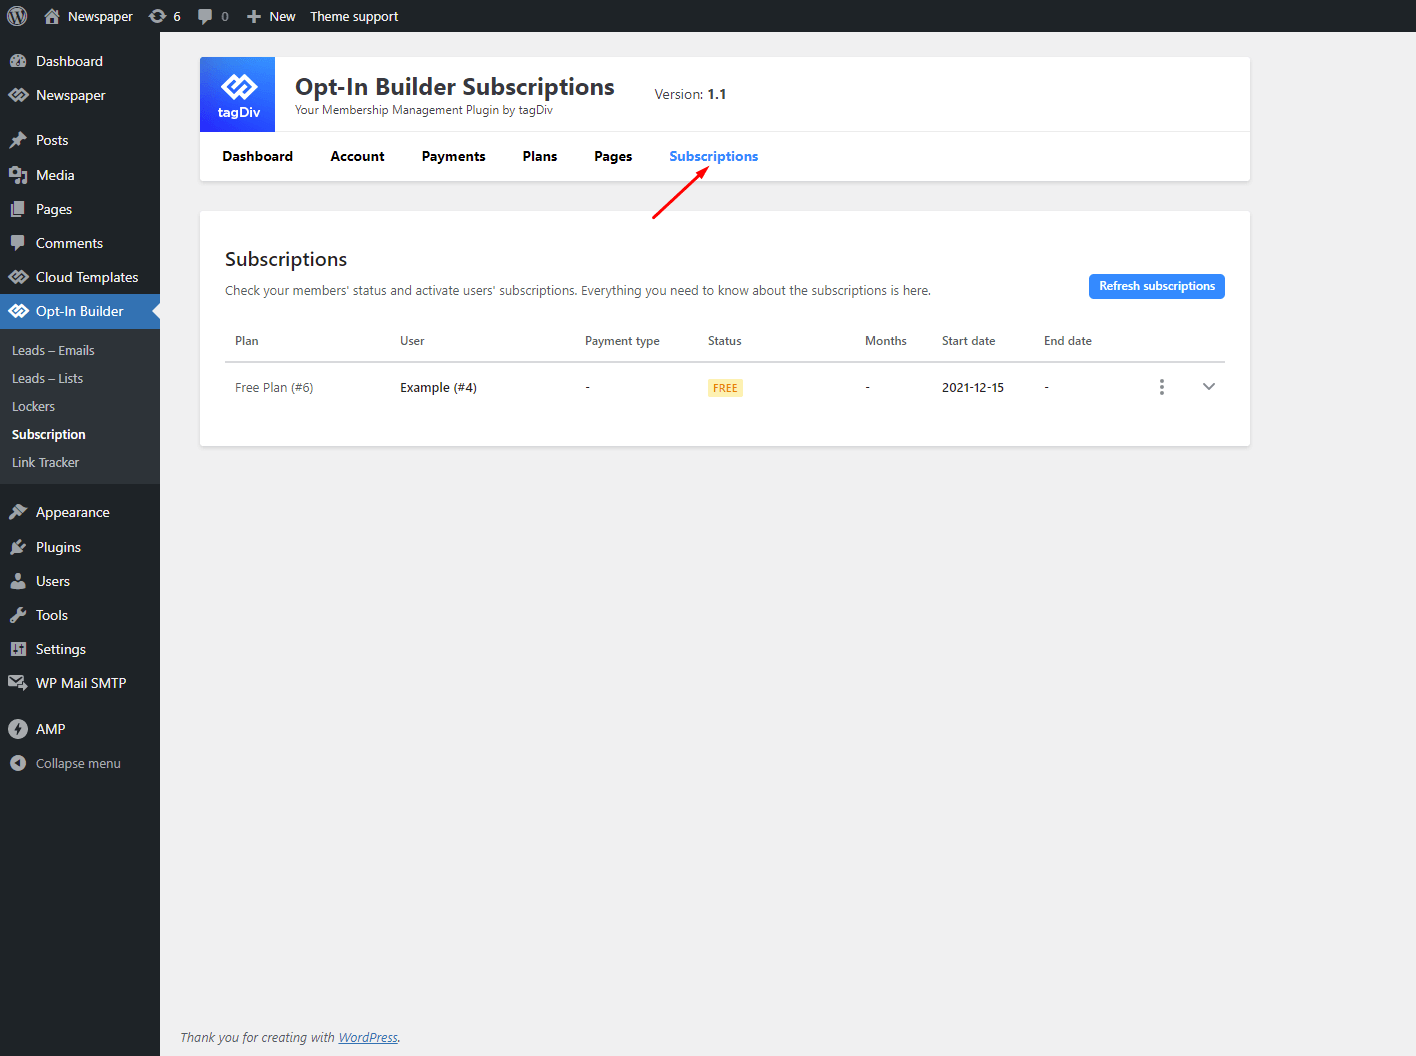 Opt-In Builder Subscriptions